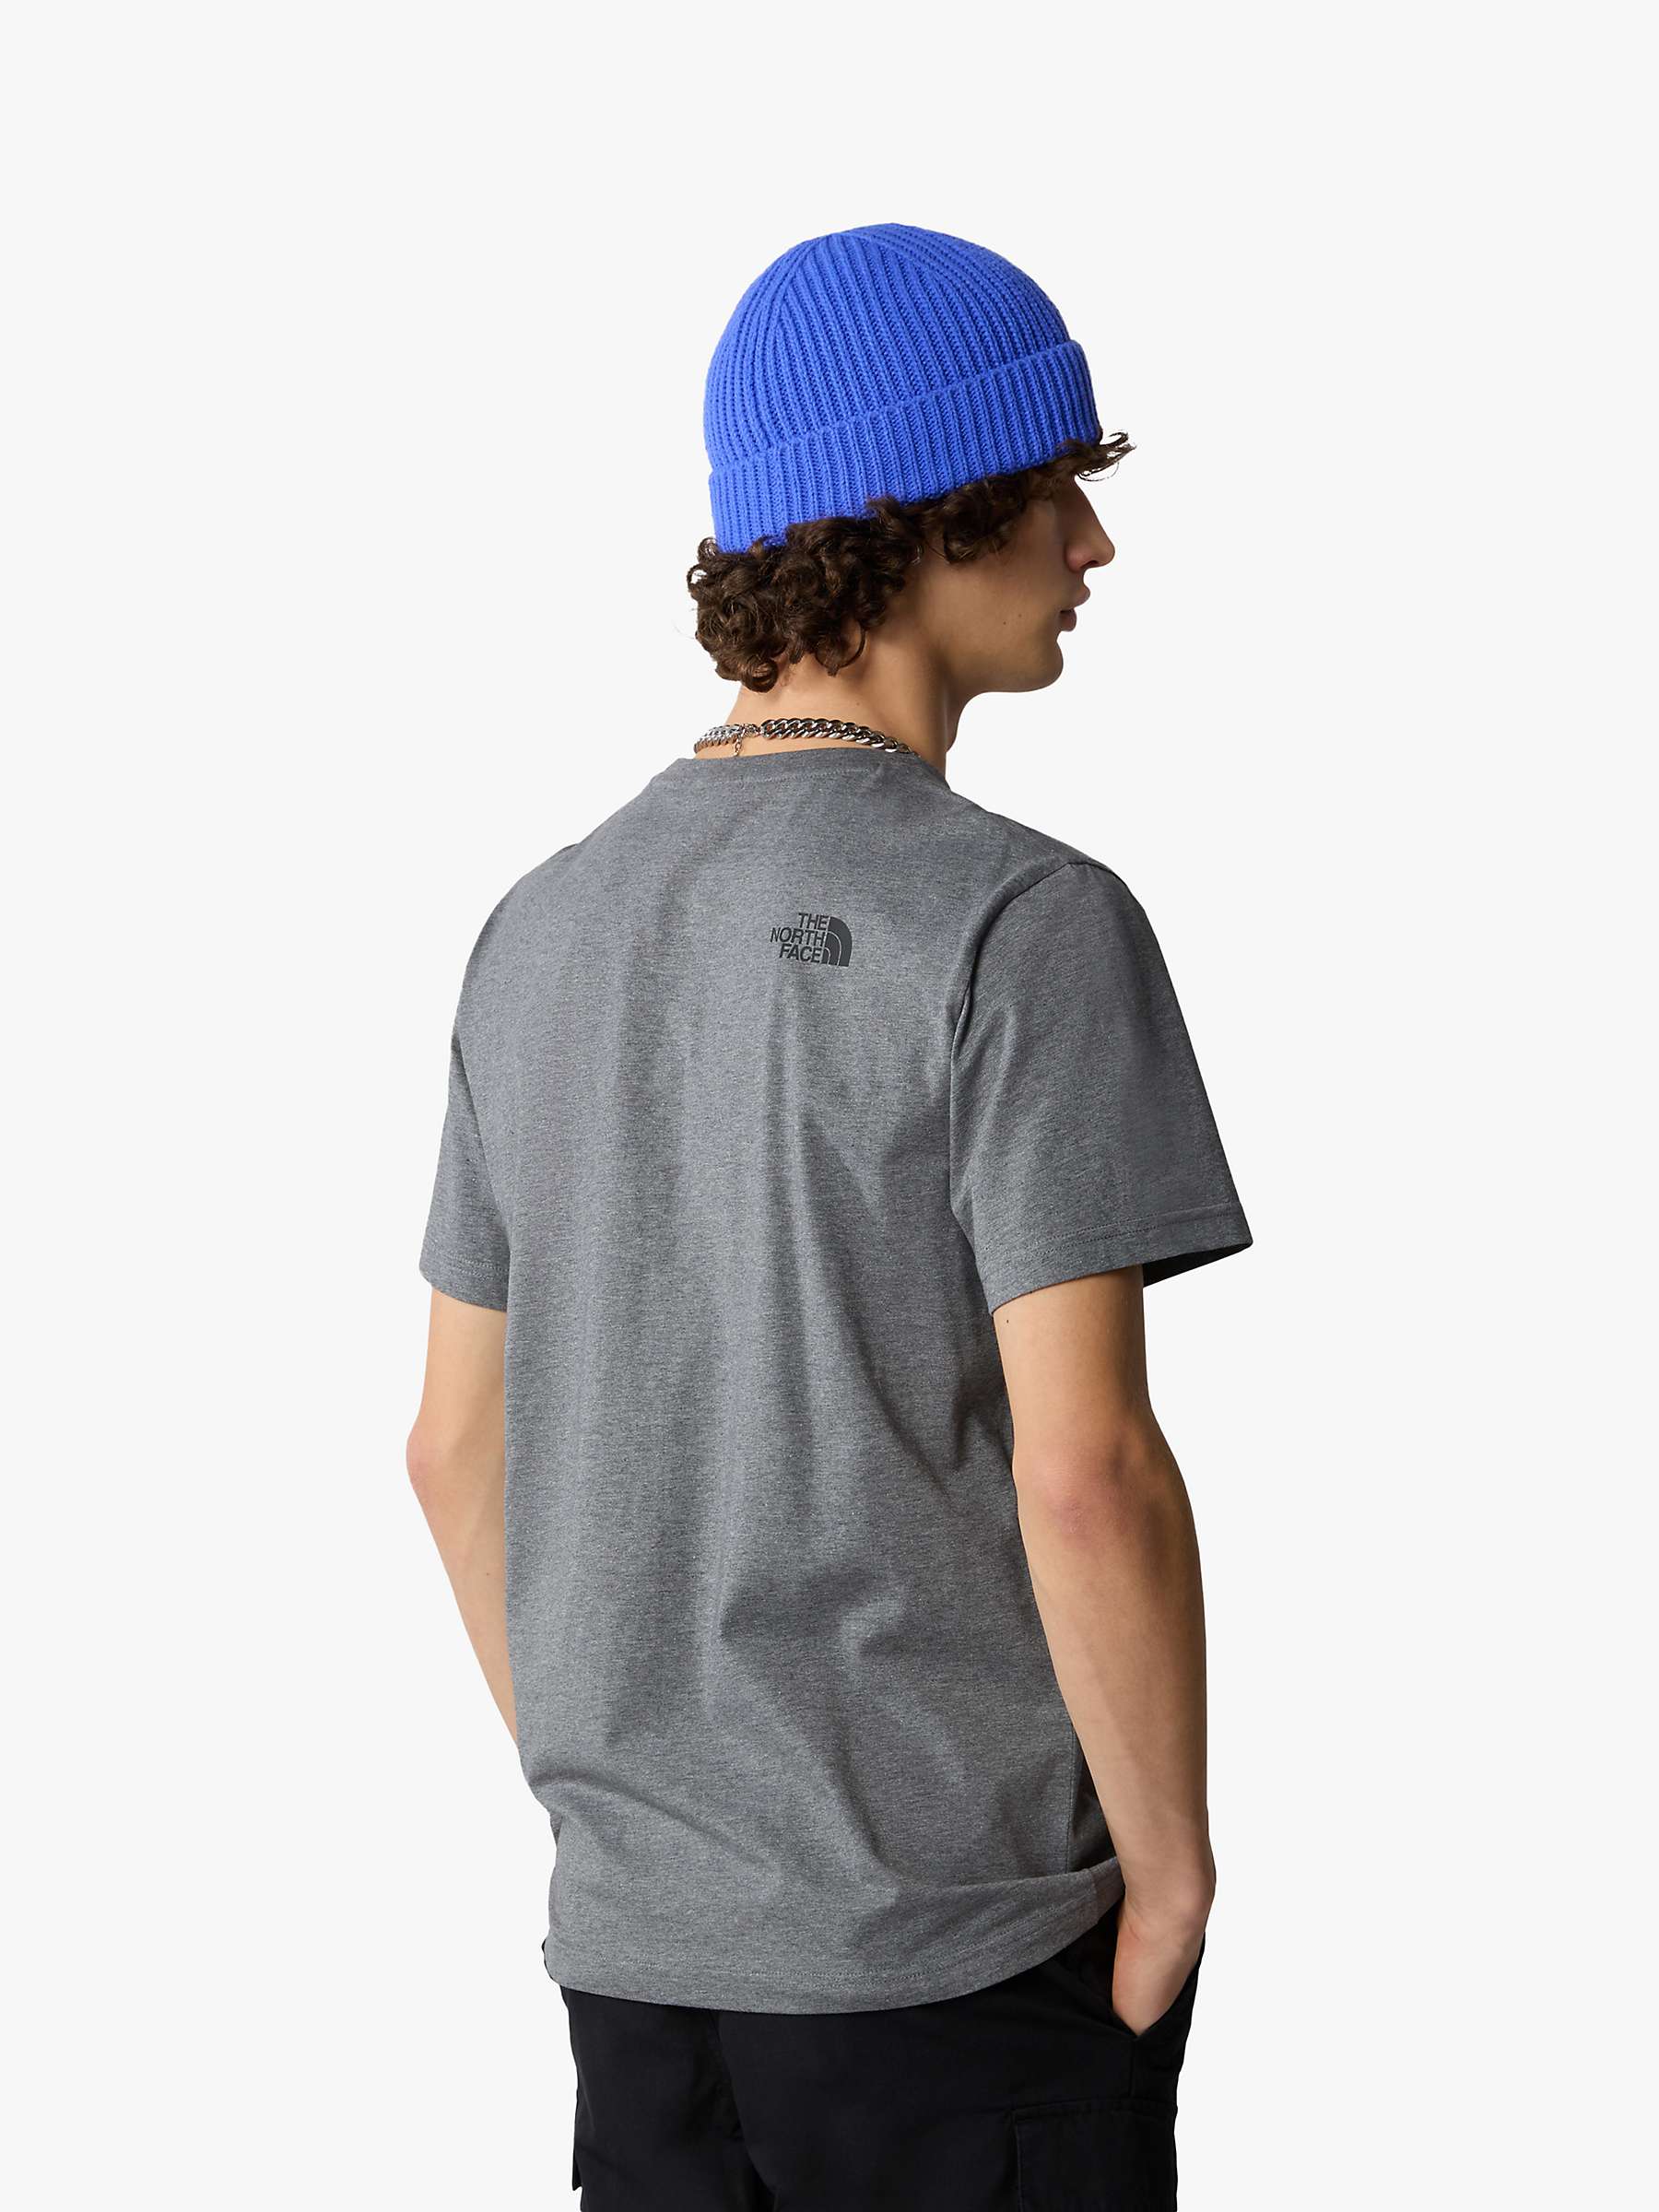 Buy The North Face Dome Short Sleeve T-Shirt, Grey Heather Online at johnlewis.com